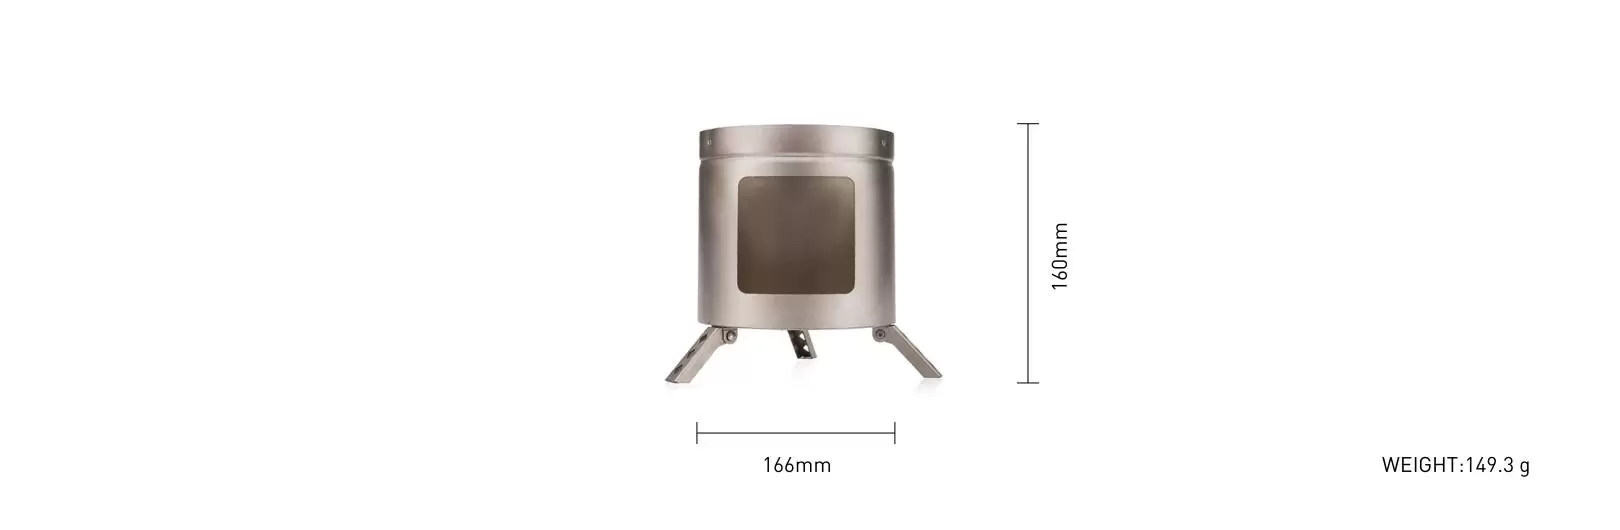 details of Portable with Stand Titanium Outdoor Wood stove for Camping